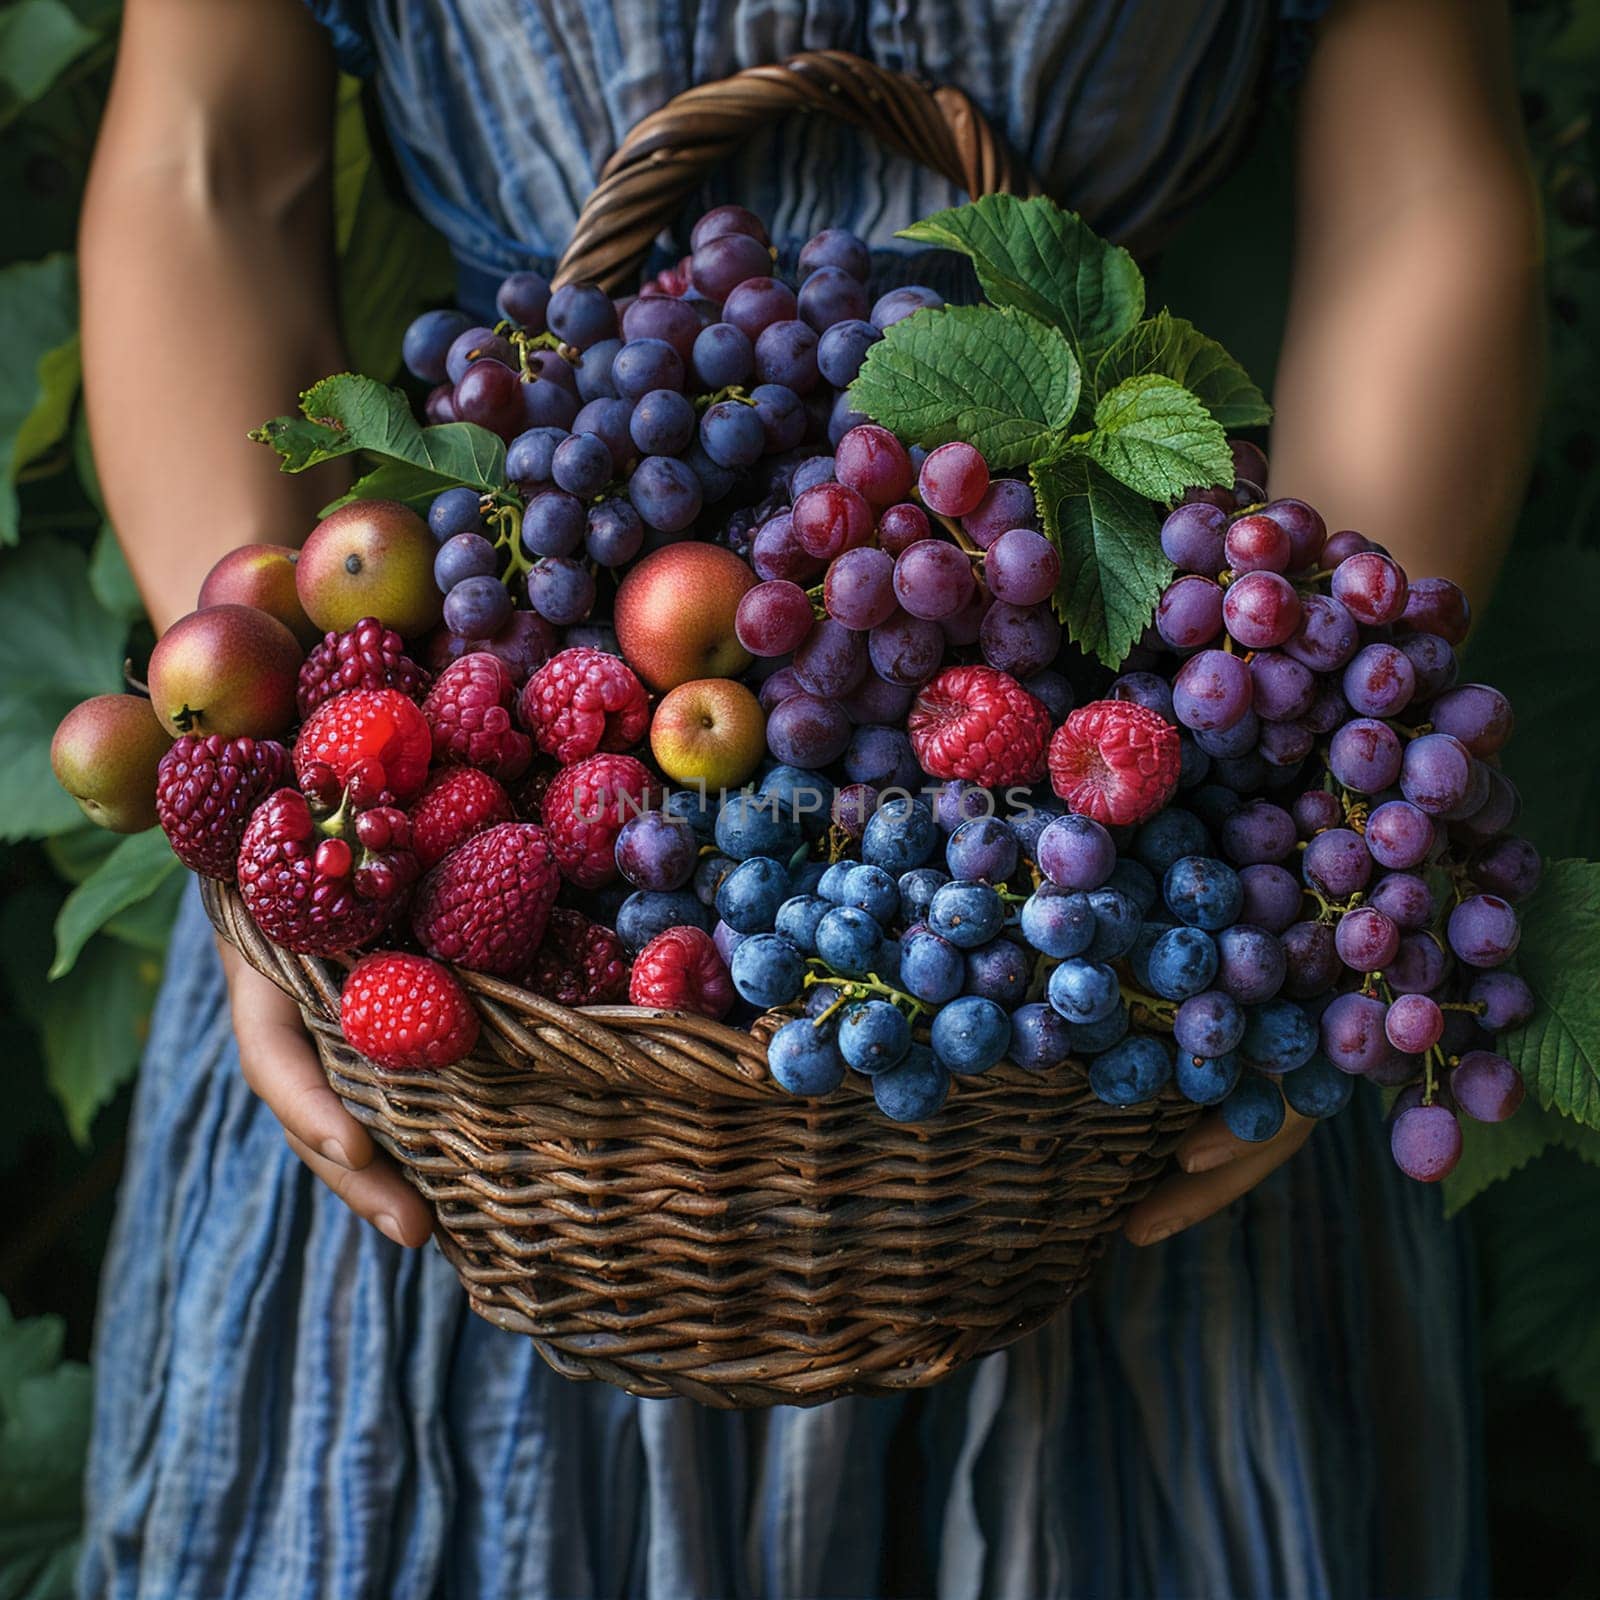 Handwoven Baskets Full of Freshly Picked Fruit, The textures blur with the bounty, the harvest in human hands.